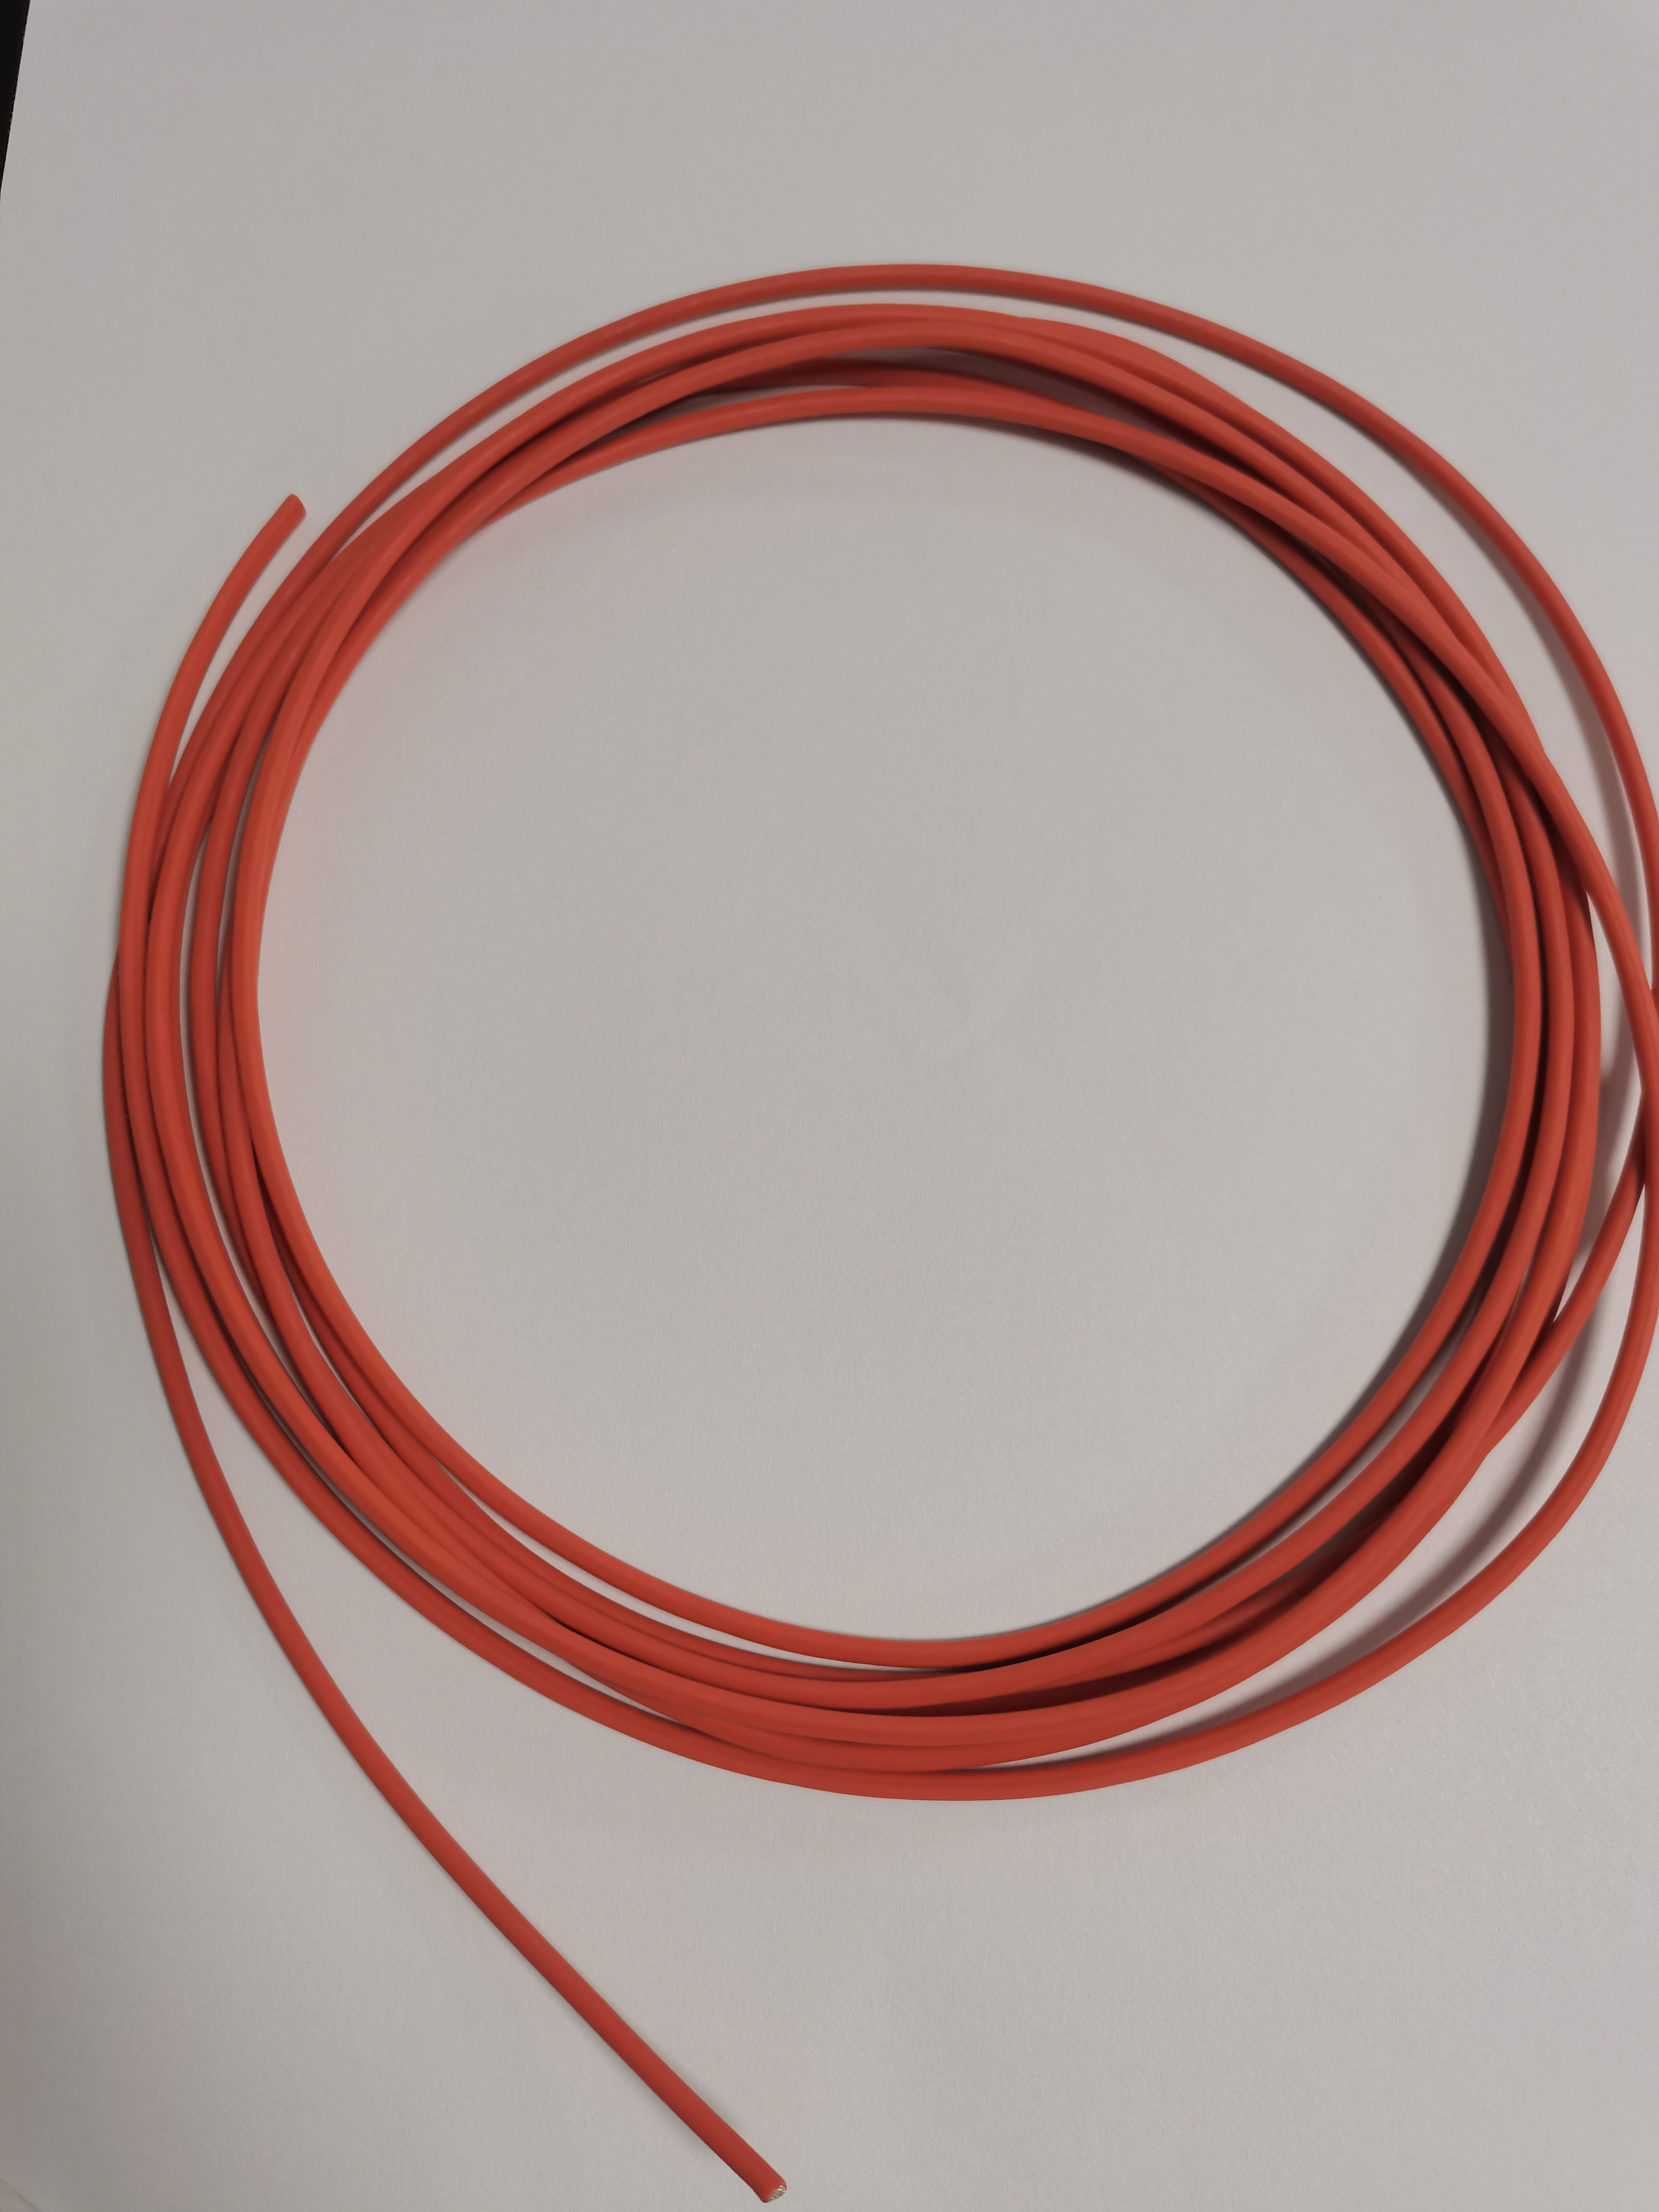 Oil Cooled Motor Lead Wire